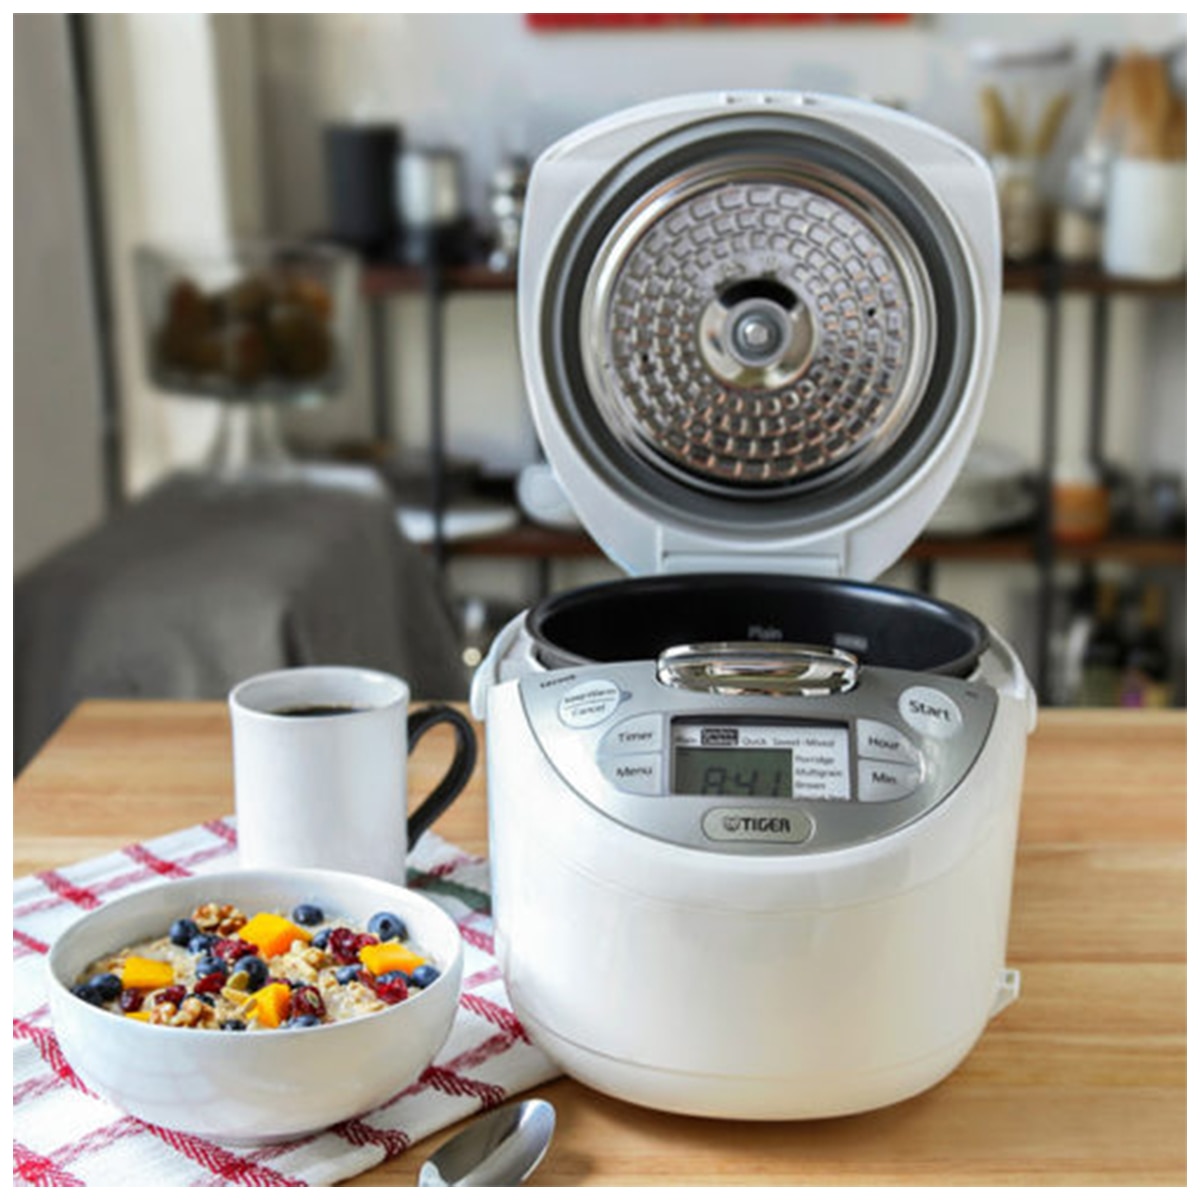 Tiger 4 in 1 Rice Cooker 10 cups JAX-R18A